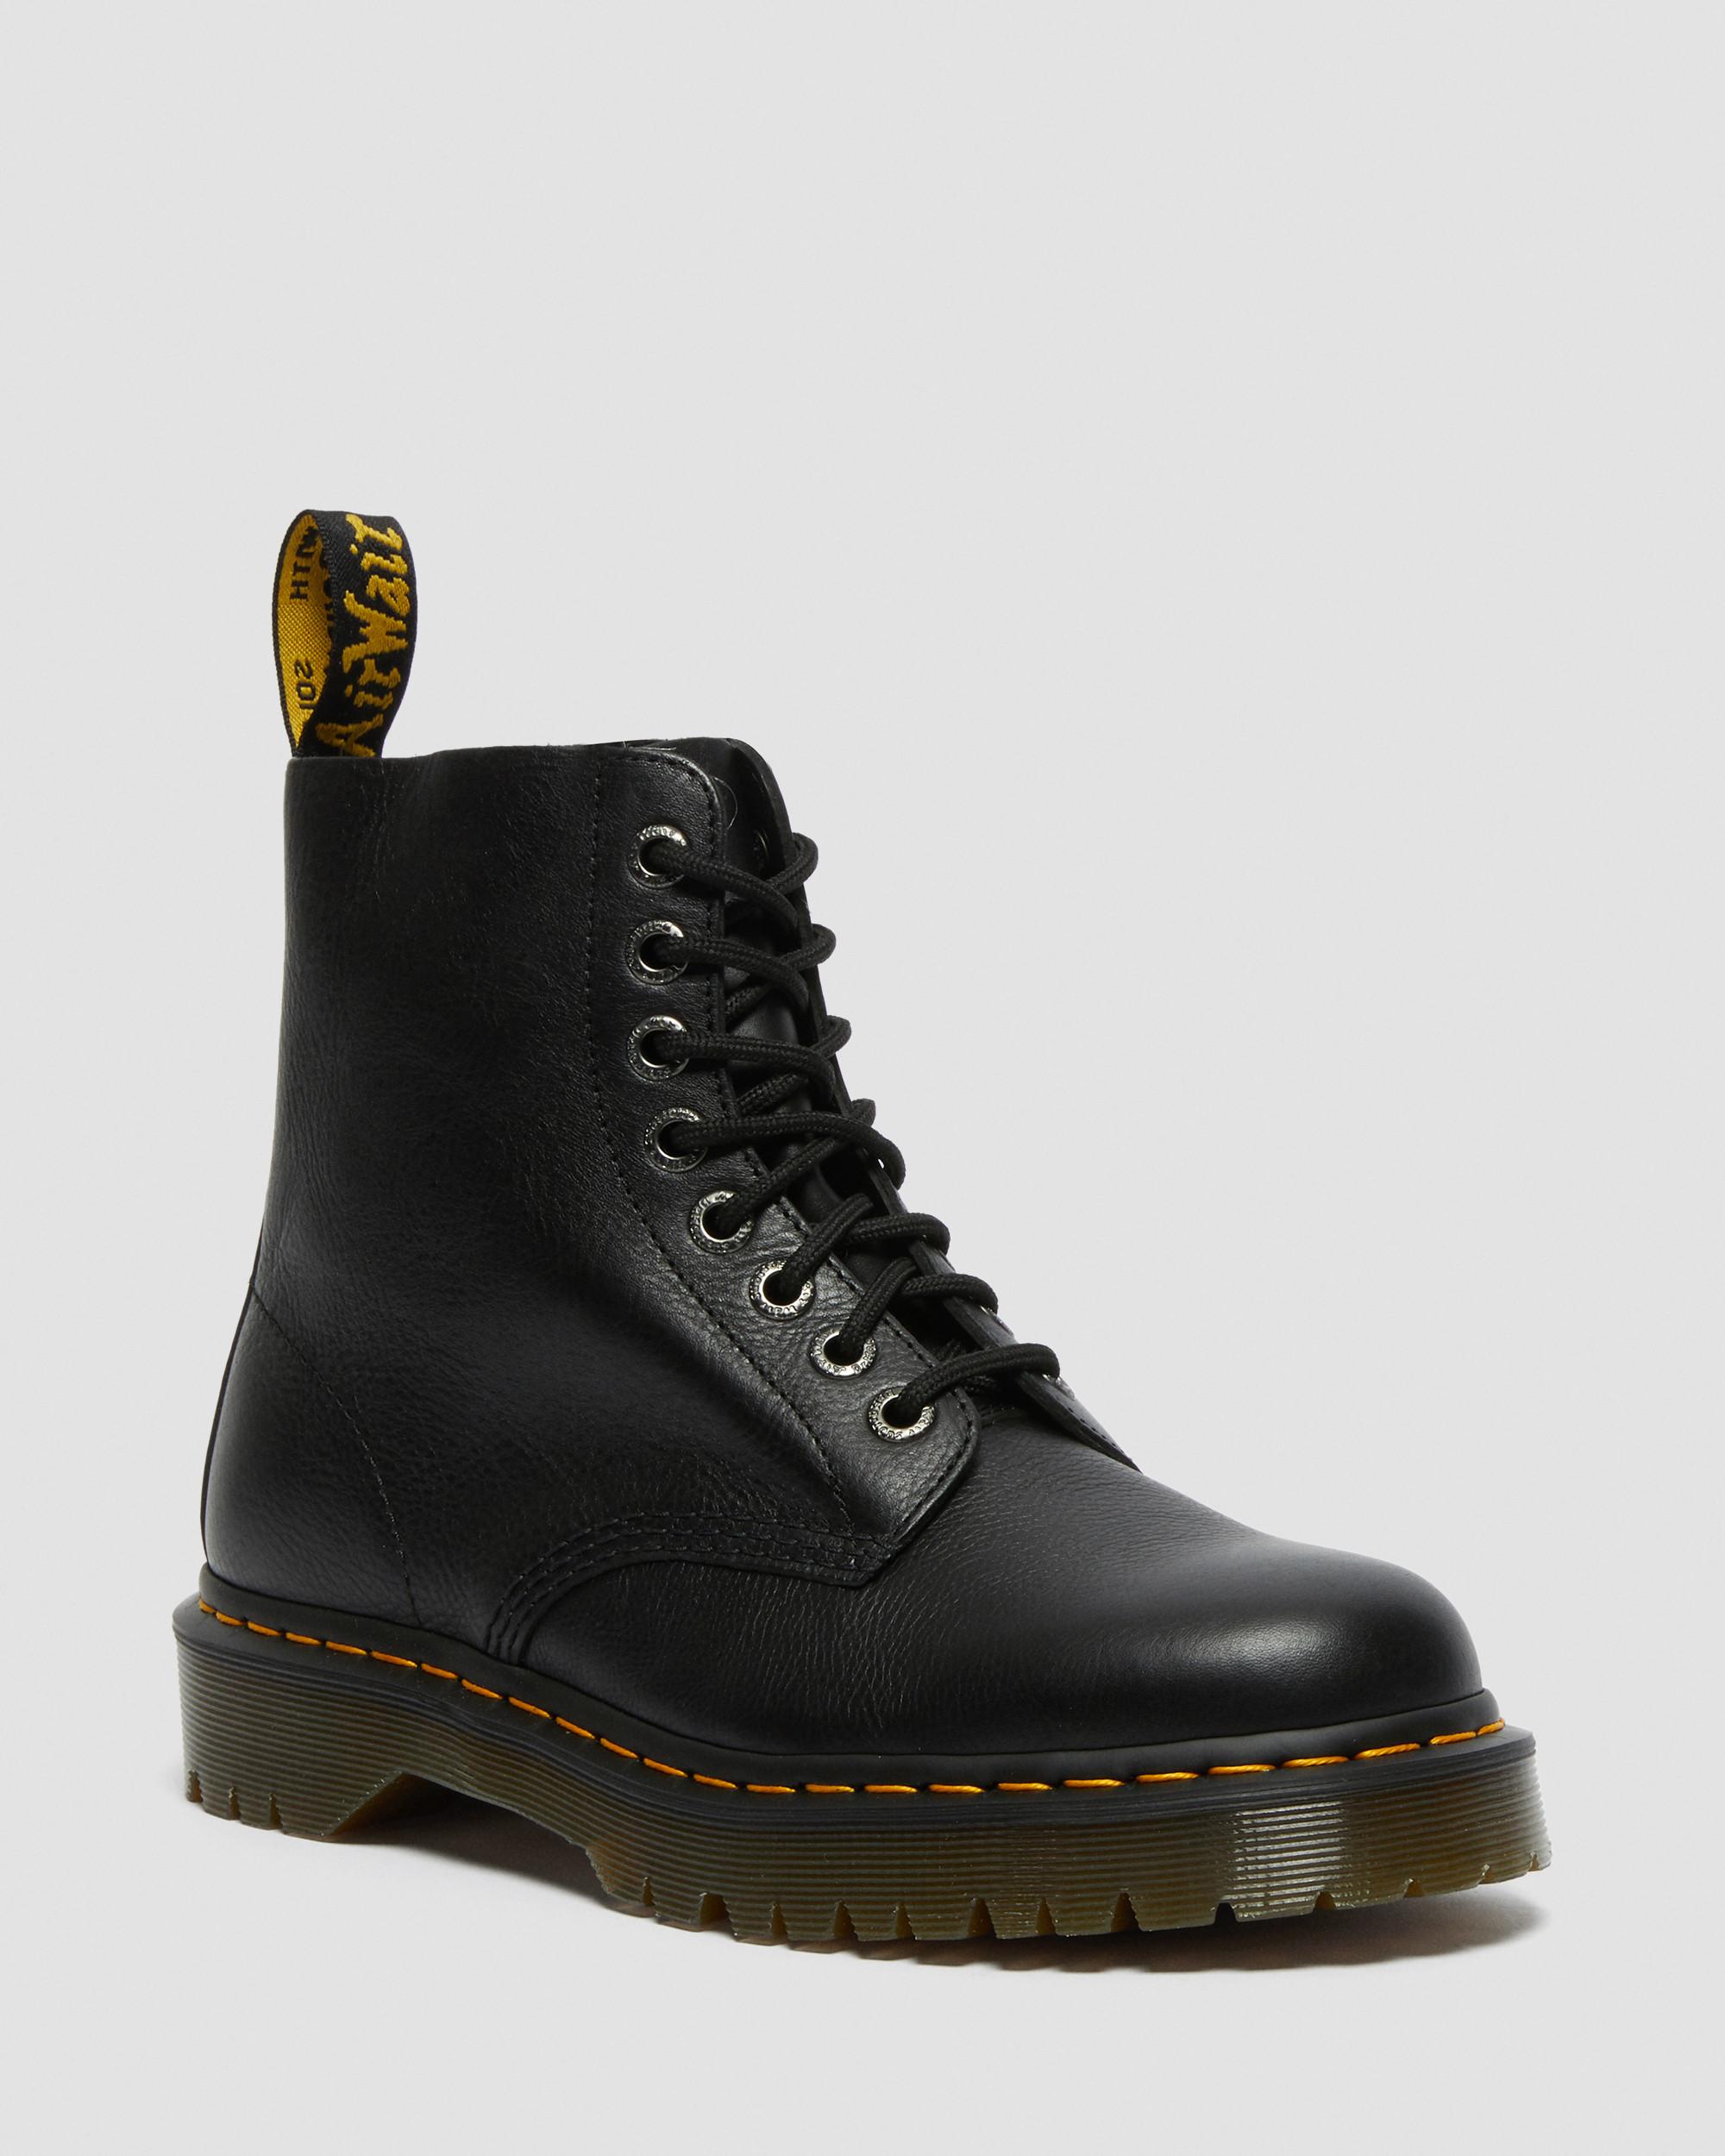 1460 Lace-Up Boots | 8 Eye Boots | Dr. Martens